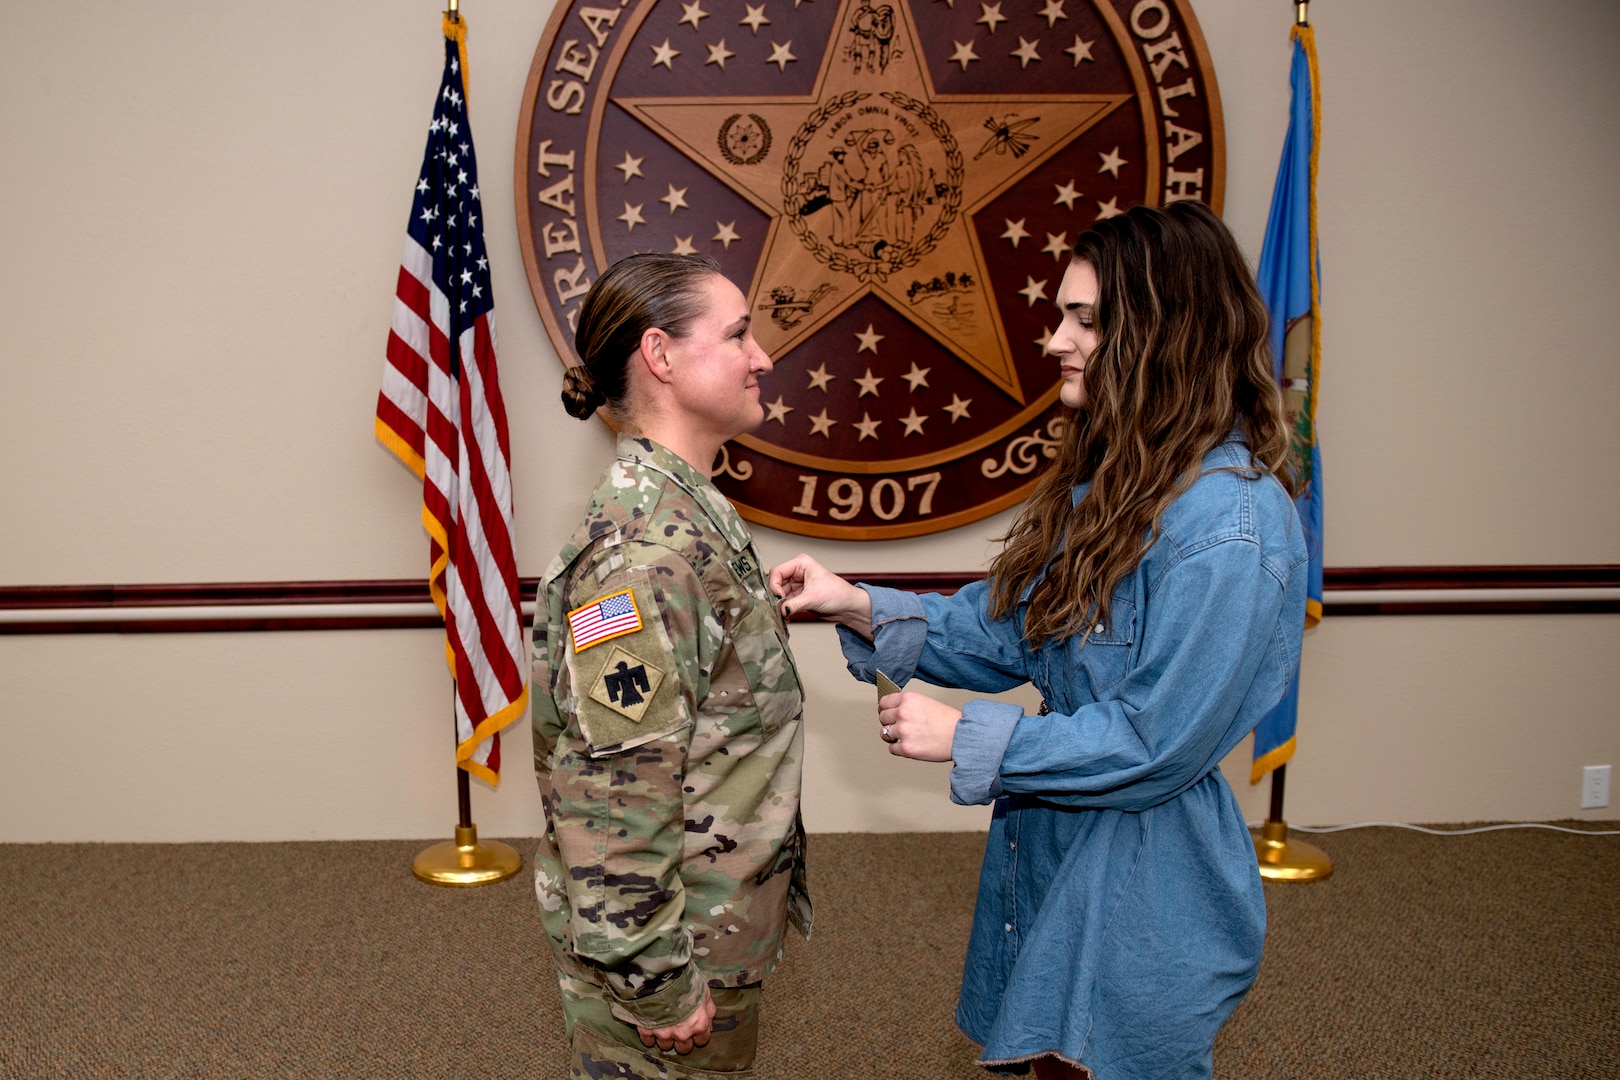 Oklahoma National Guard Master Sgt. Megan Mathews, battalion operations sergeant with the 1st Battalion, 160th Field Artillery Regiment, 45th Infantry Brigade Combat Team, stands as her daughter, Nora, pins on her new rank at her promotion ceremony held at Joint Force Headquarters in Oklahoma City, Dec. 15, 2021. (Oklahoma National Guard photo by Sgt. 1st Class Mireille Merilice-Roberts)